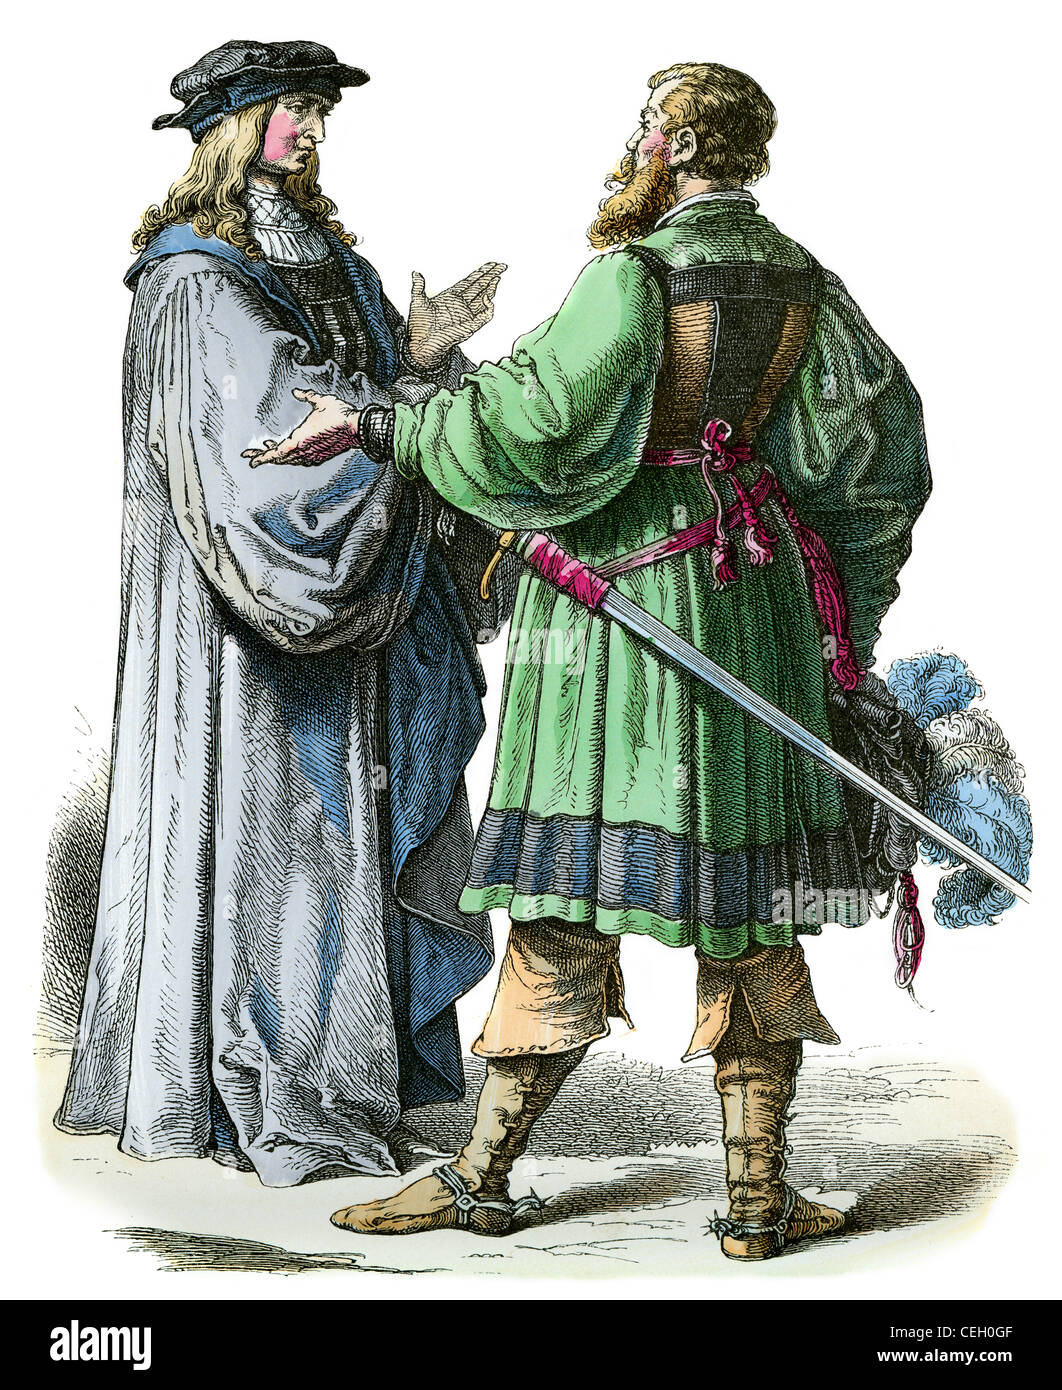 A German knight and magistrate from the 16th century in traditional dress Stock Photo